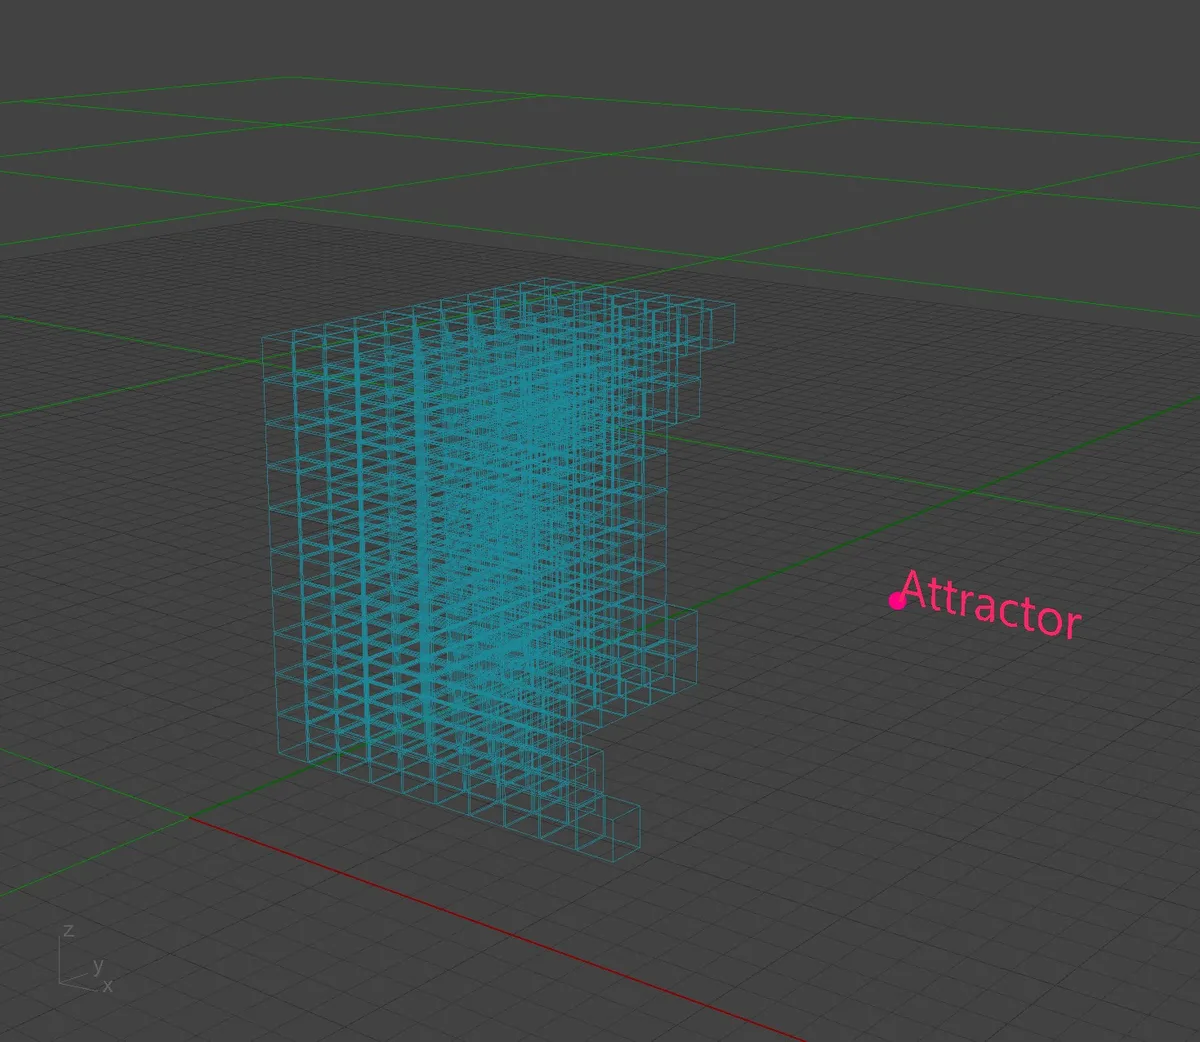 Allowing / Disallowing Modules based on attractor - Limited